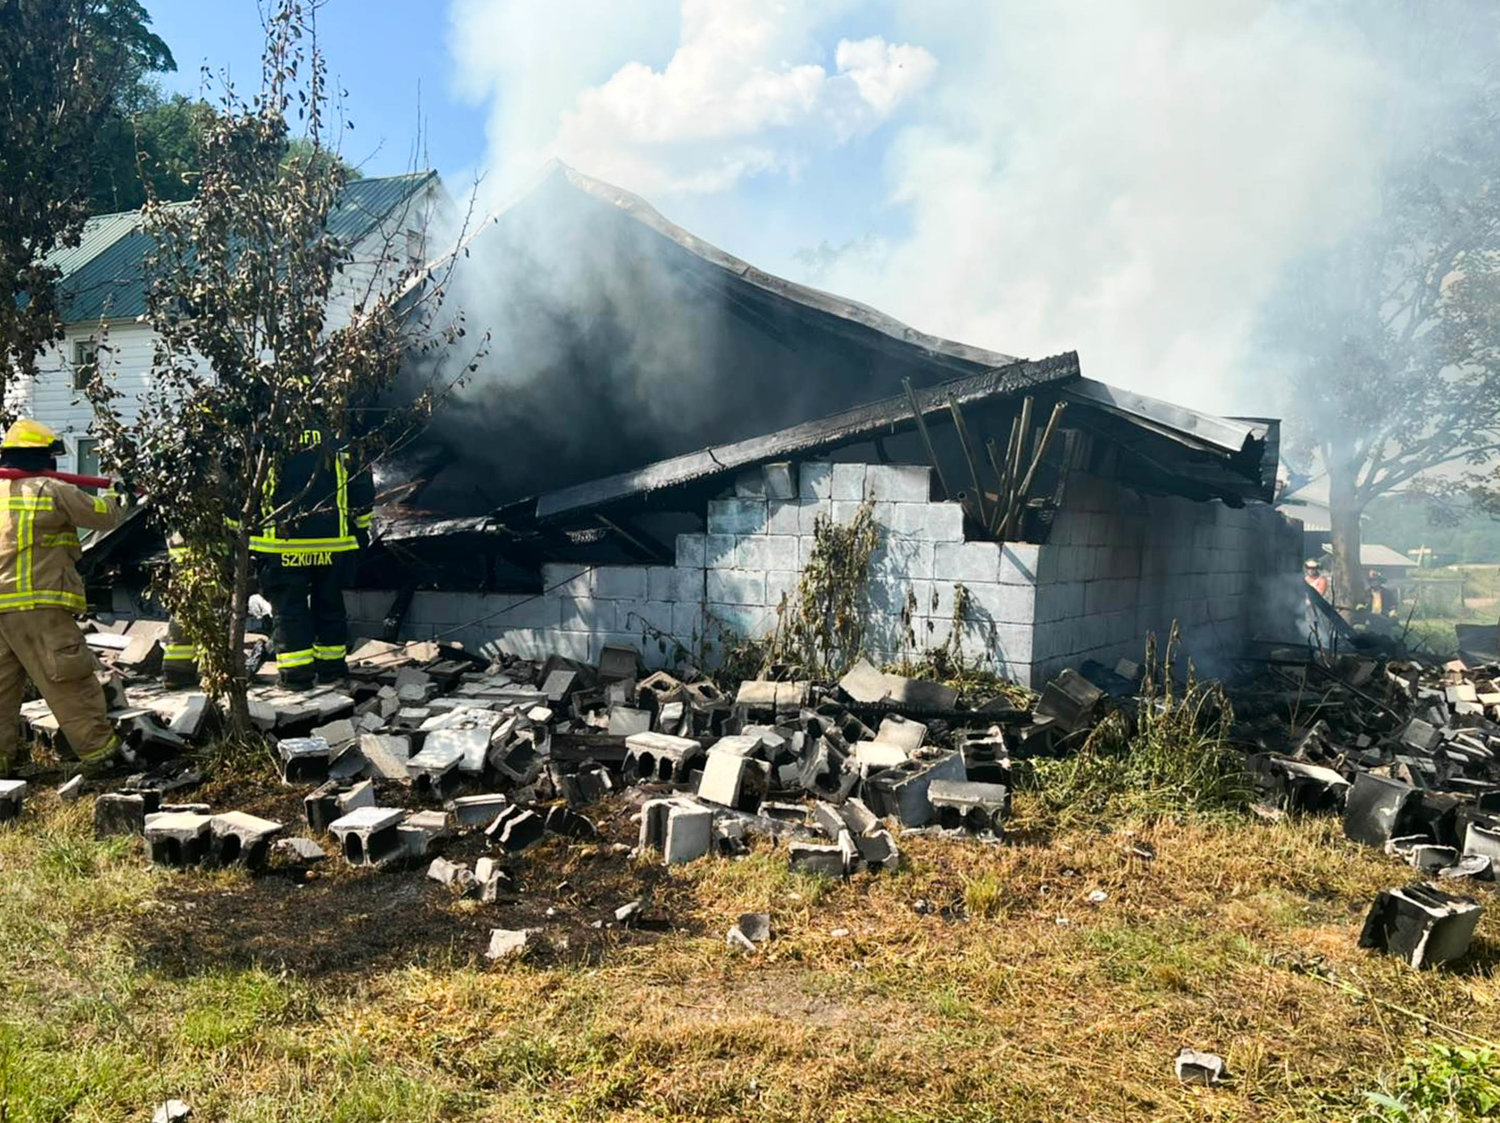 Volunteer firefighters douse what remains of a garage fire on River Road in Western Saturday afternoon. Fire officials said no one was injured and the cause remains under investigation.